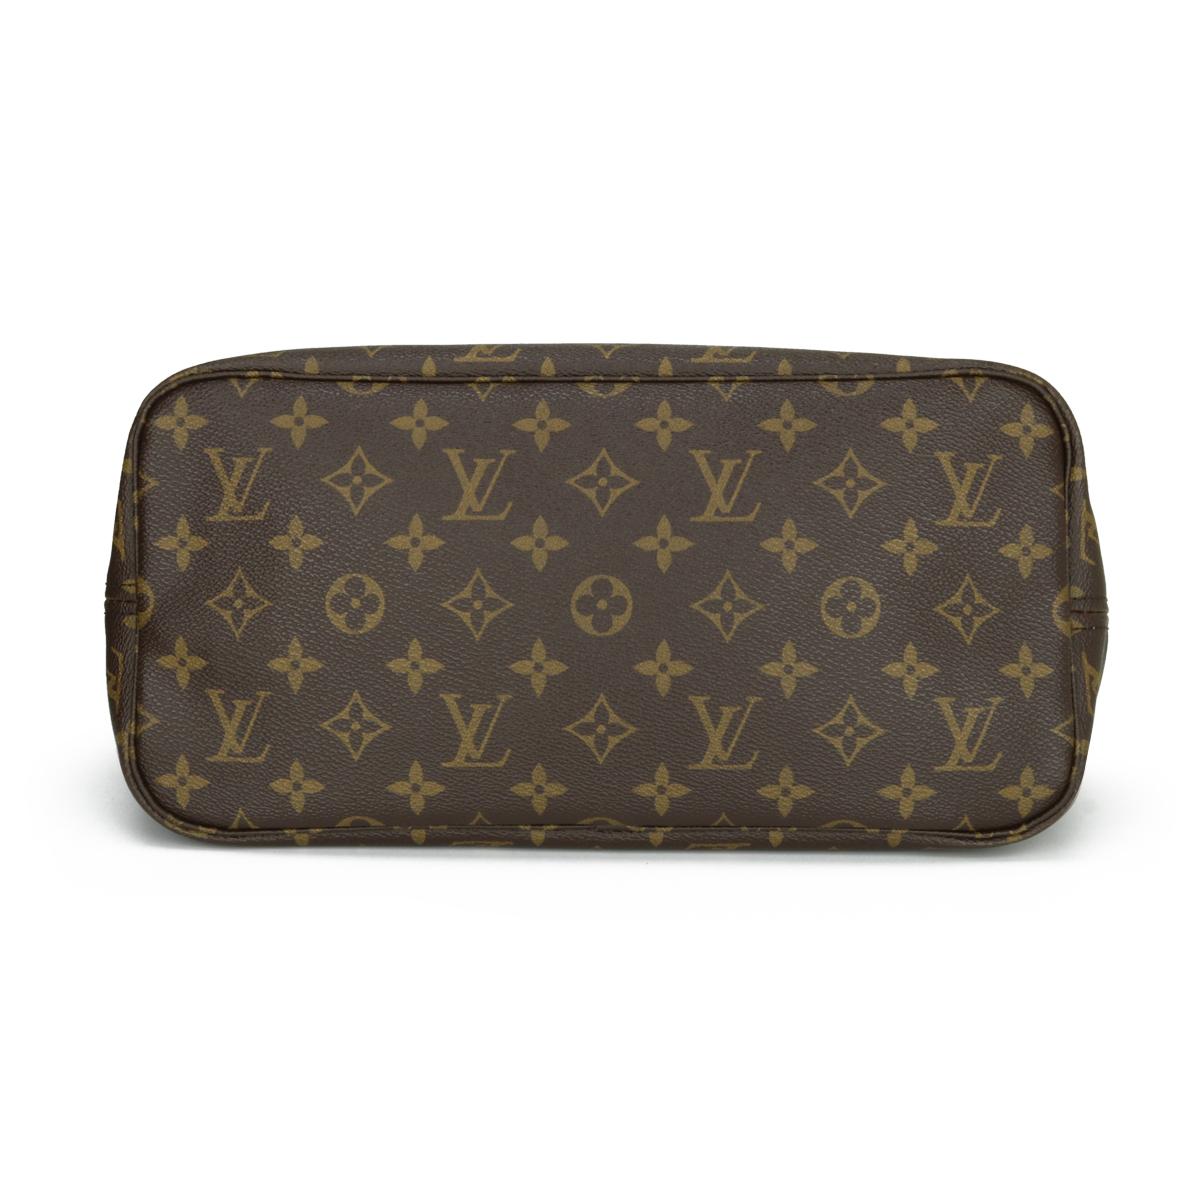 Women's or Men's Louis Vuitton Neverfull MM Bag in Monogram with Beige Interior 2014 For Sale